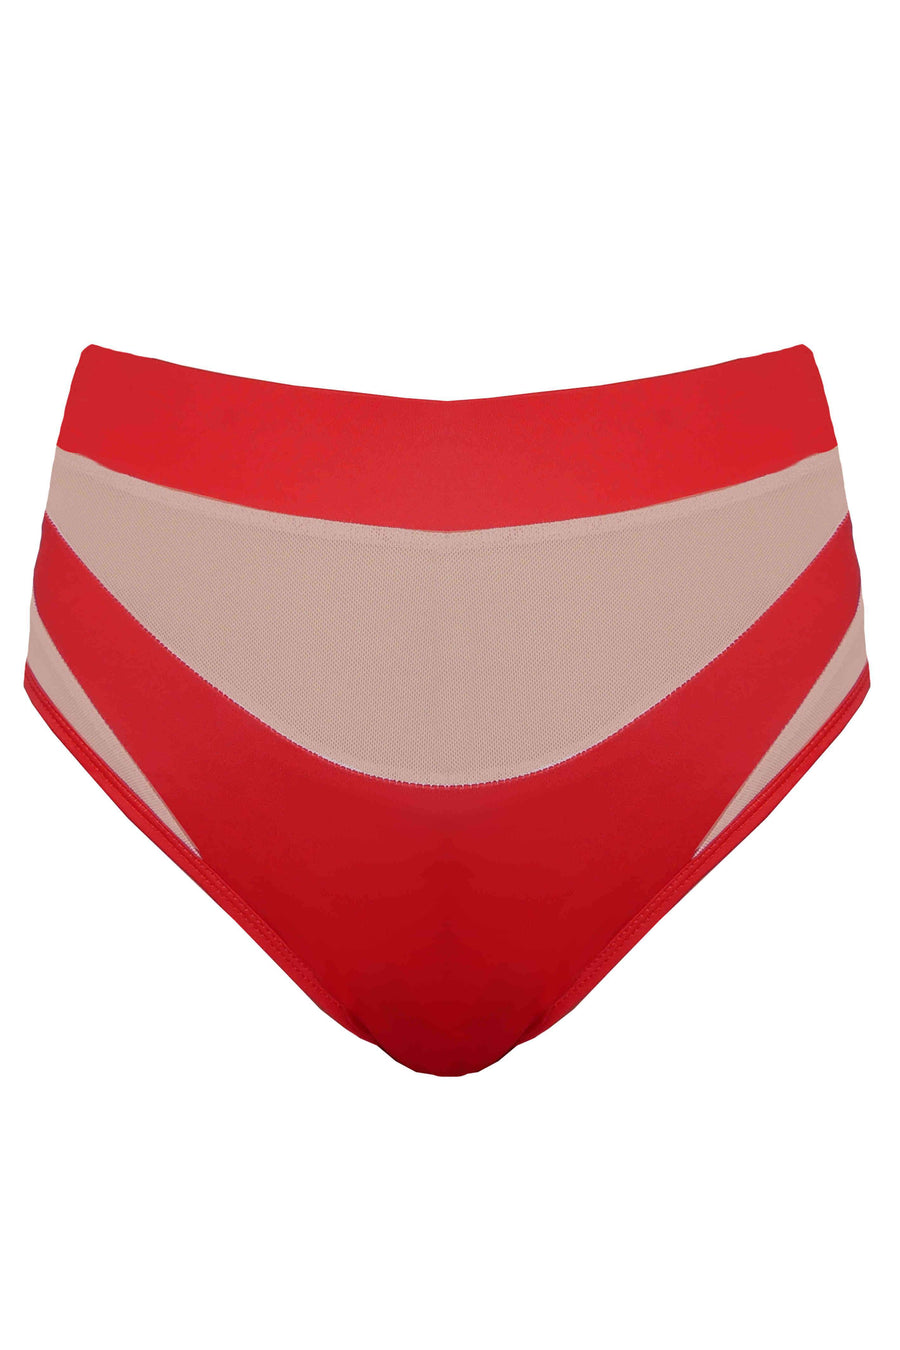 Goddess High Waisted Bottoms - Red with Sand Mesh Shorts